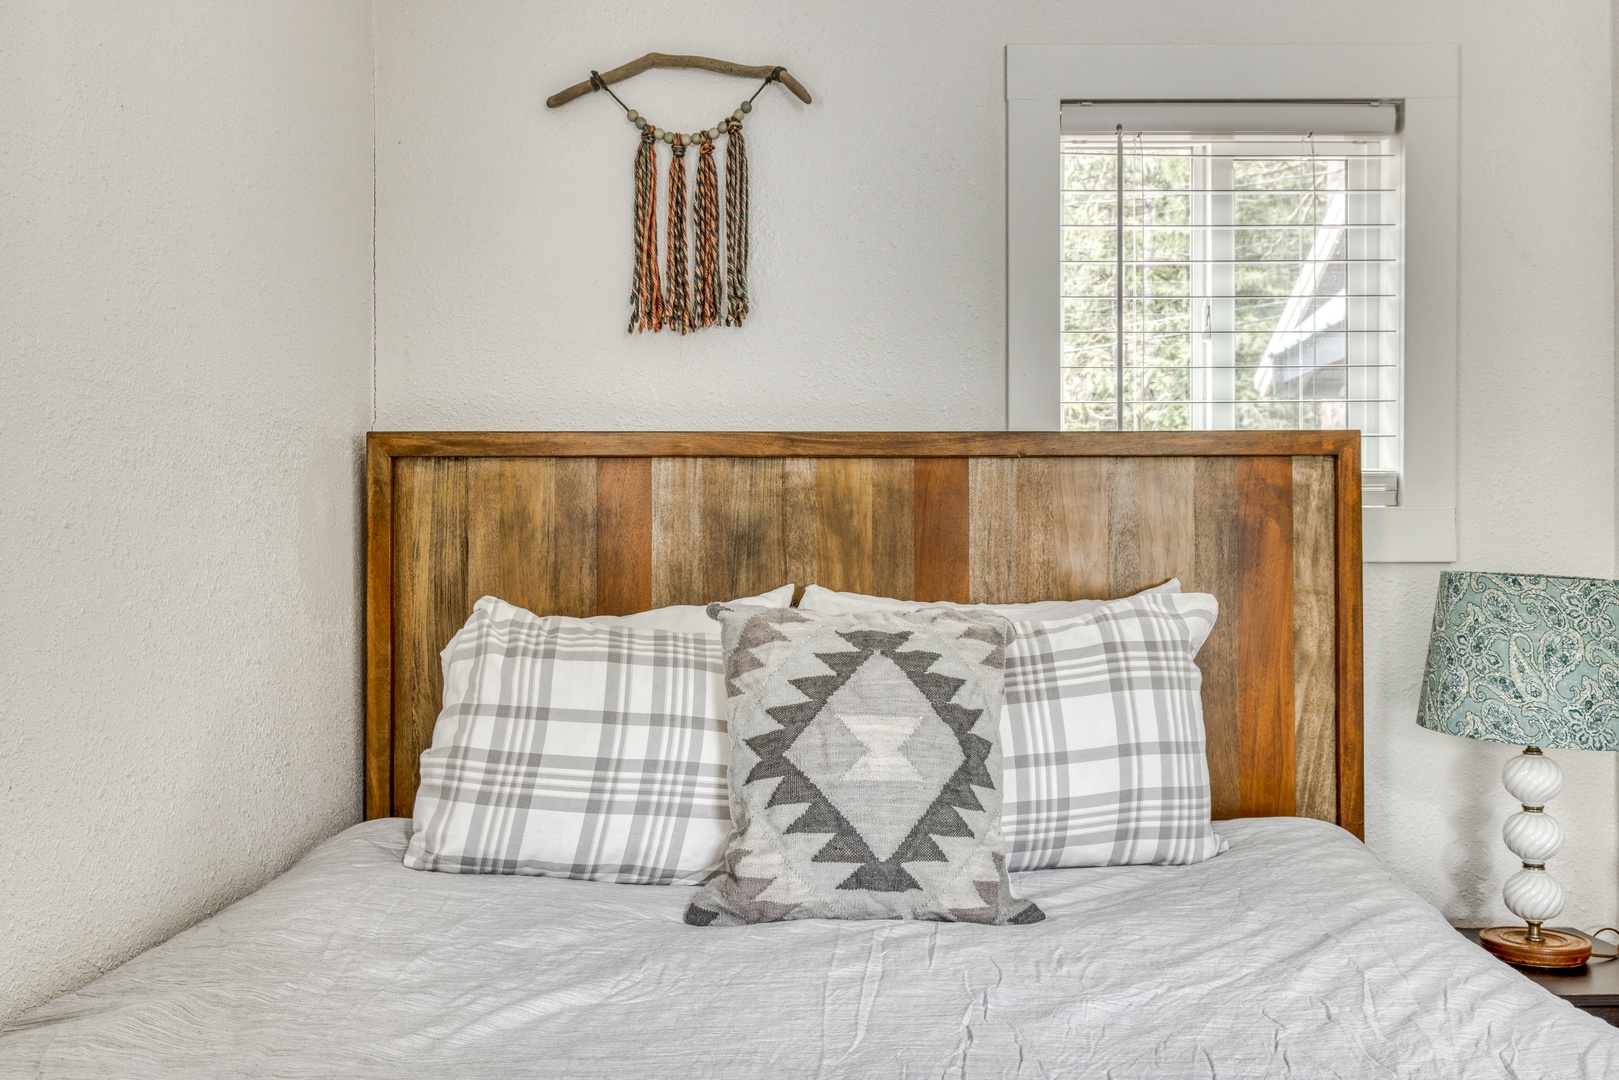 Rhododendron Vacation Rentals, Riverbend Cabin #2 - Lovely decor in queen bedroom